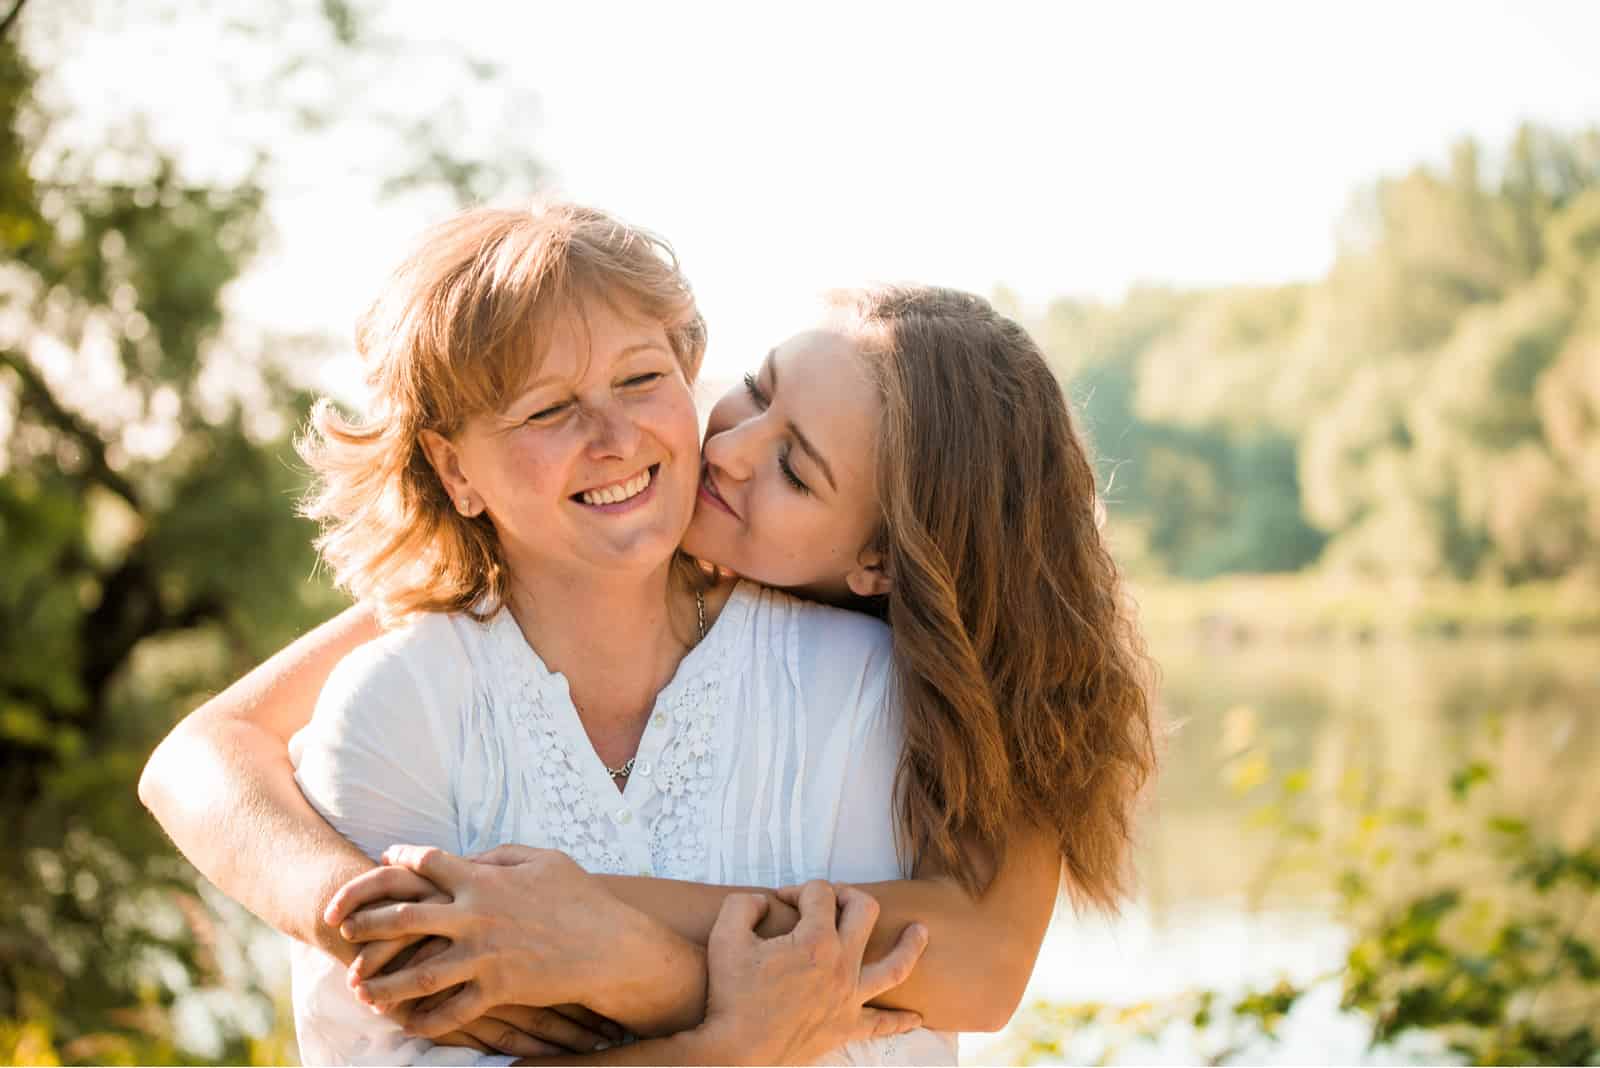 15 BIG Lessons Mothers Teach Daughters (Or At Least Should)